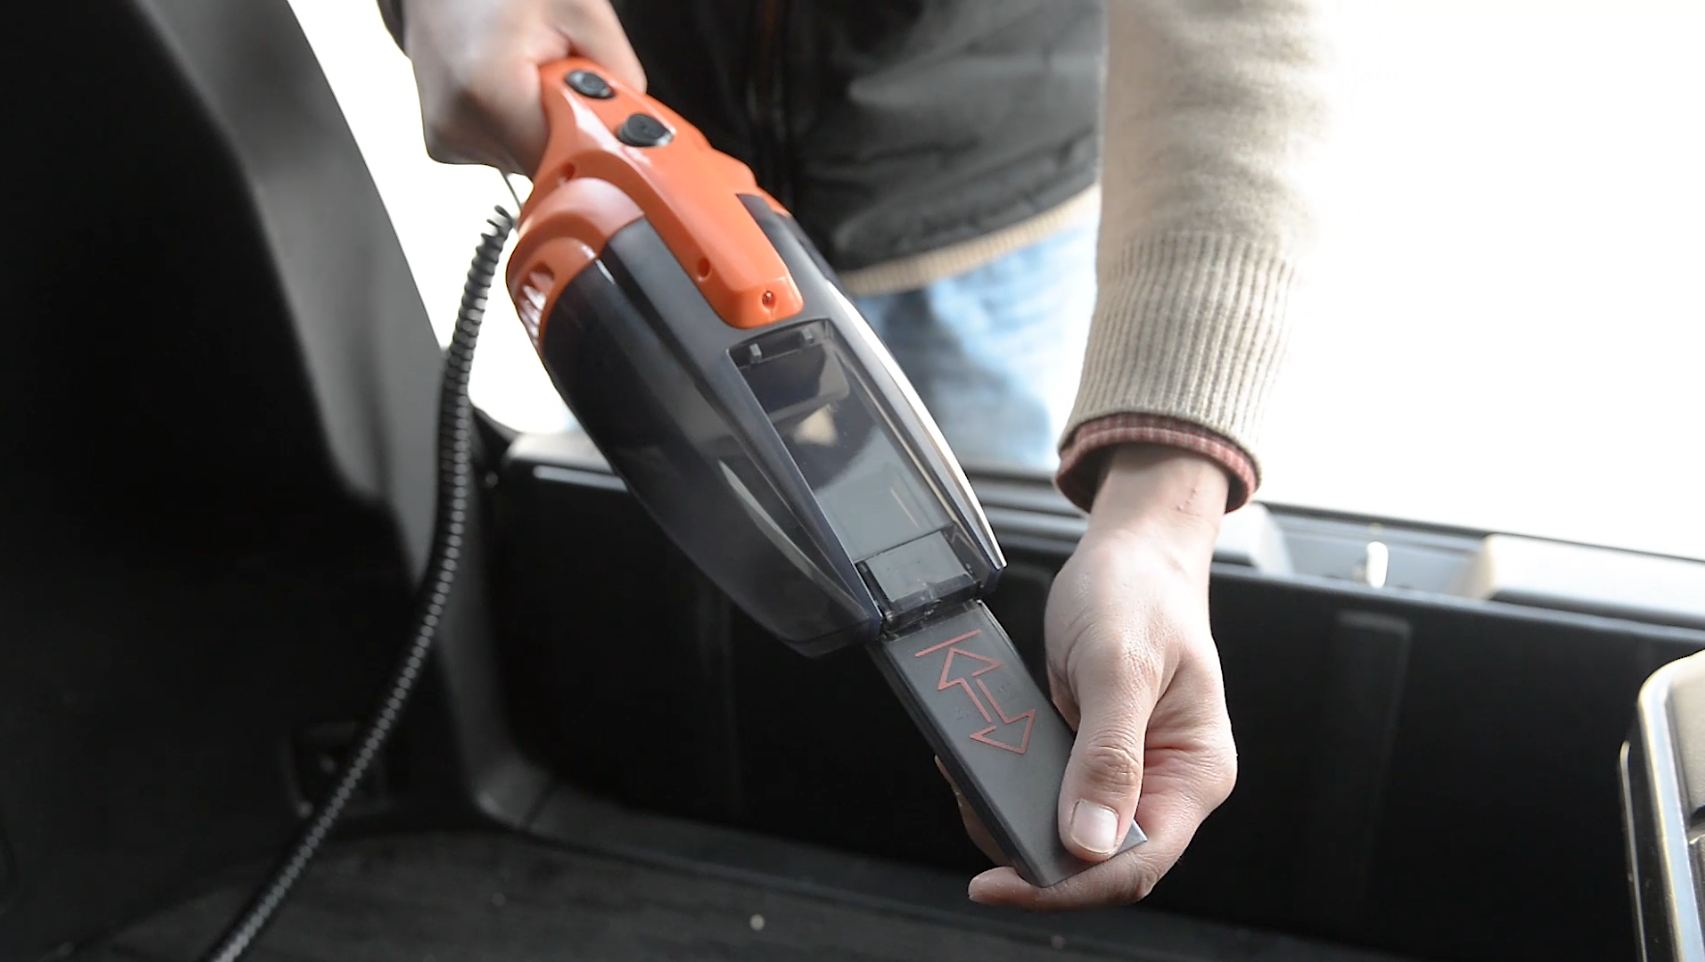 Vacmaster 12V portable car vacuum cleaners with retractable crevice tool